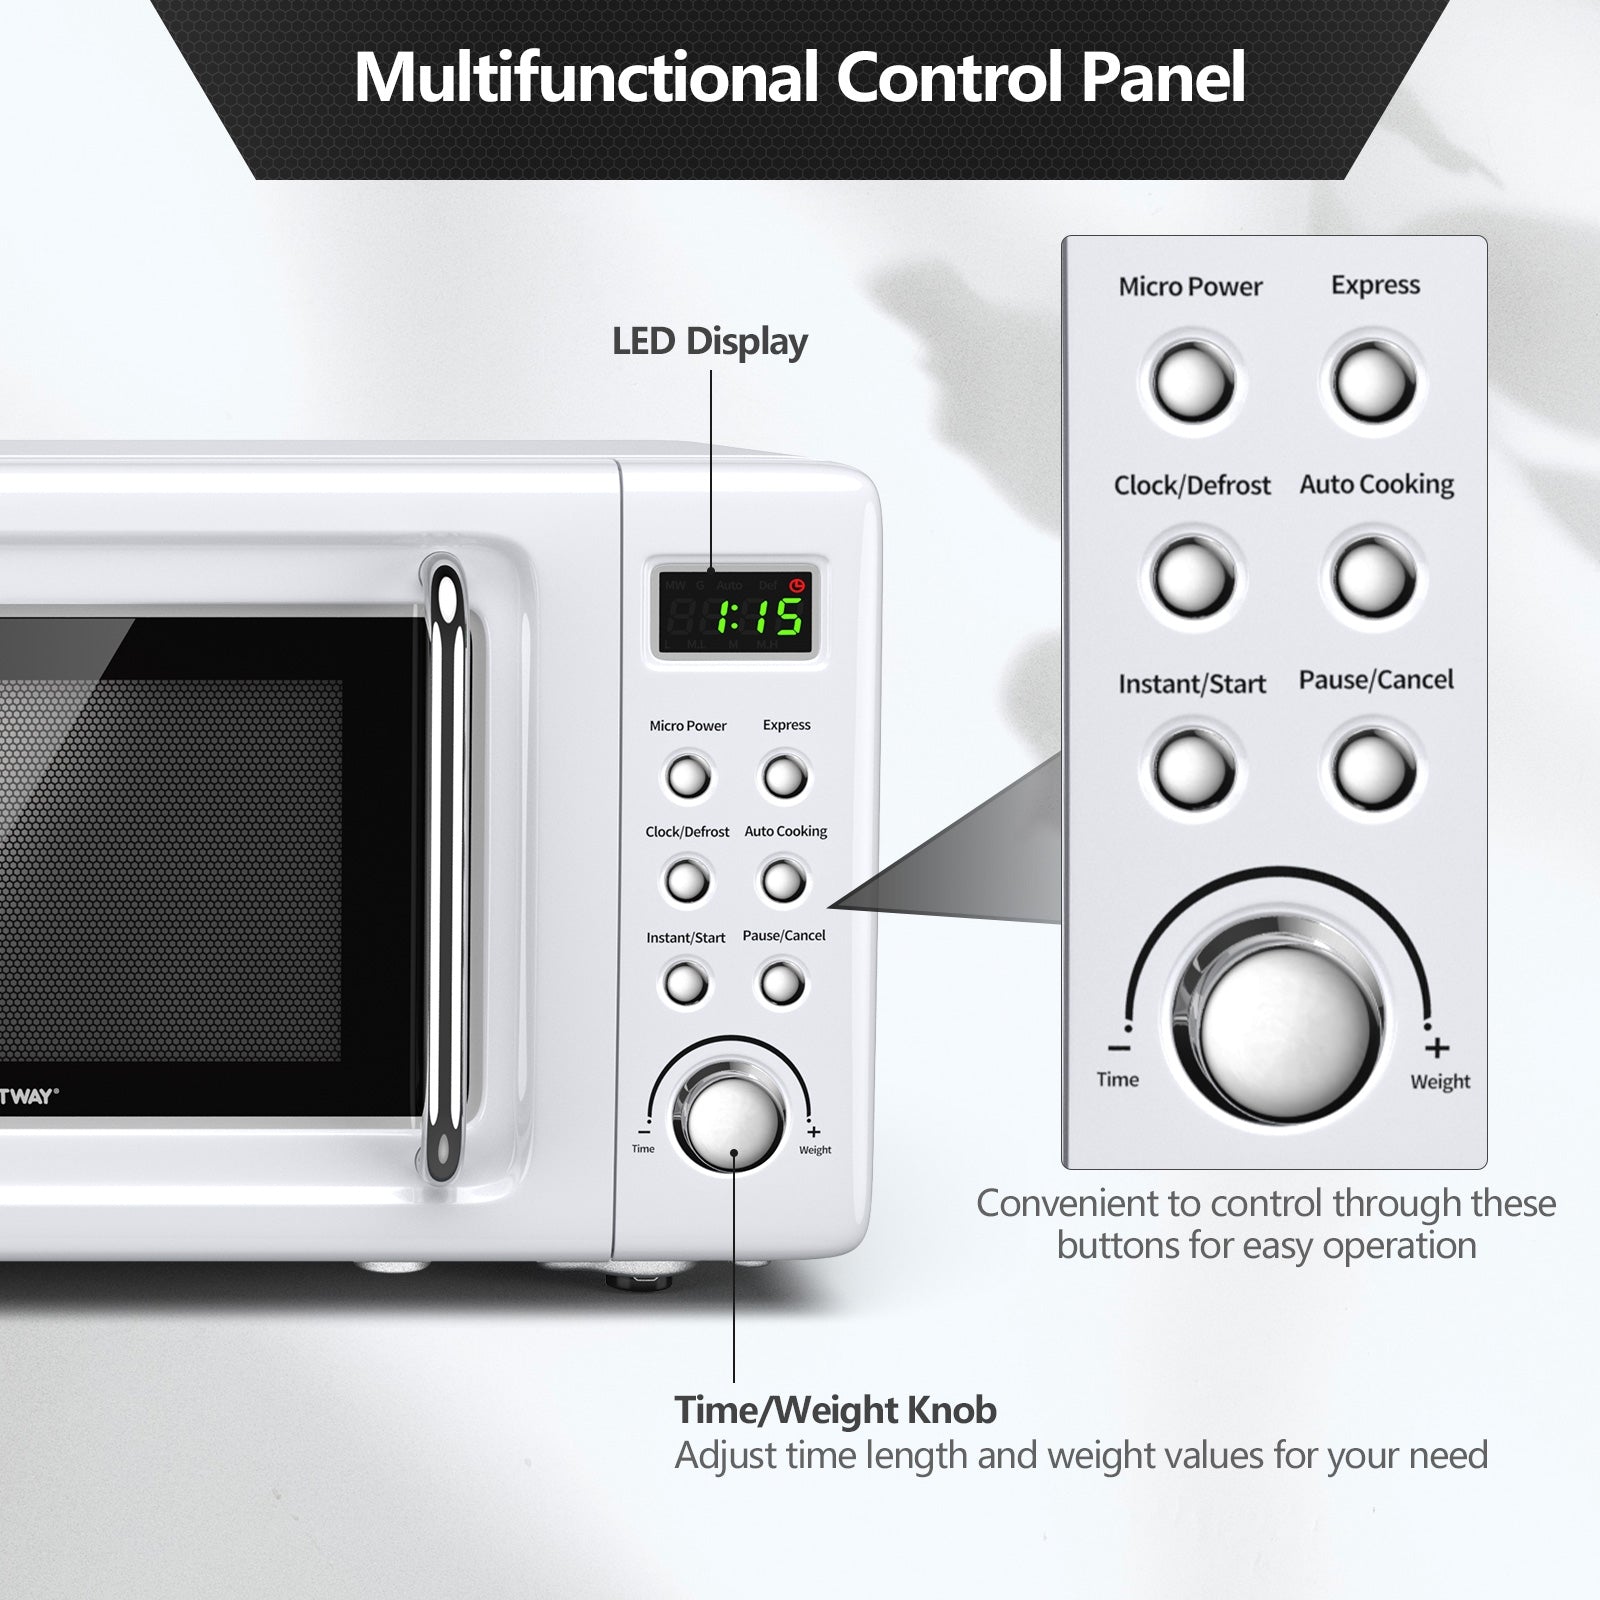 User-Friendly Operation: With a user-friendly control panel featuring 6 buttons, operating our multifunctional microwave oven is a breeze. The digital LED screen displays the remaining cooking time clearly and accurately.